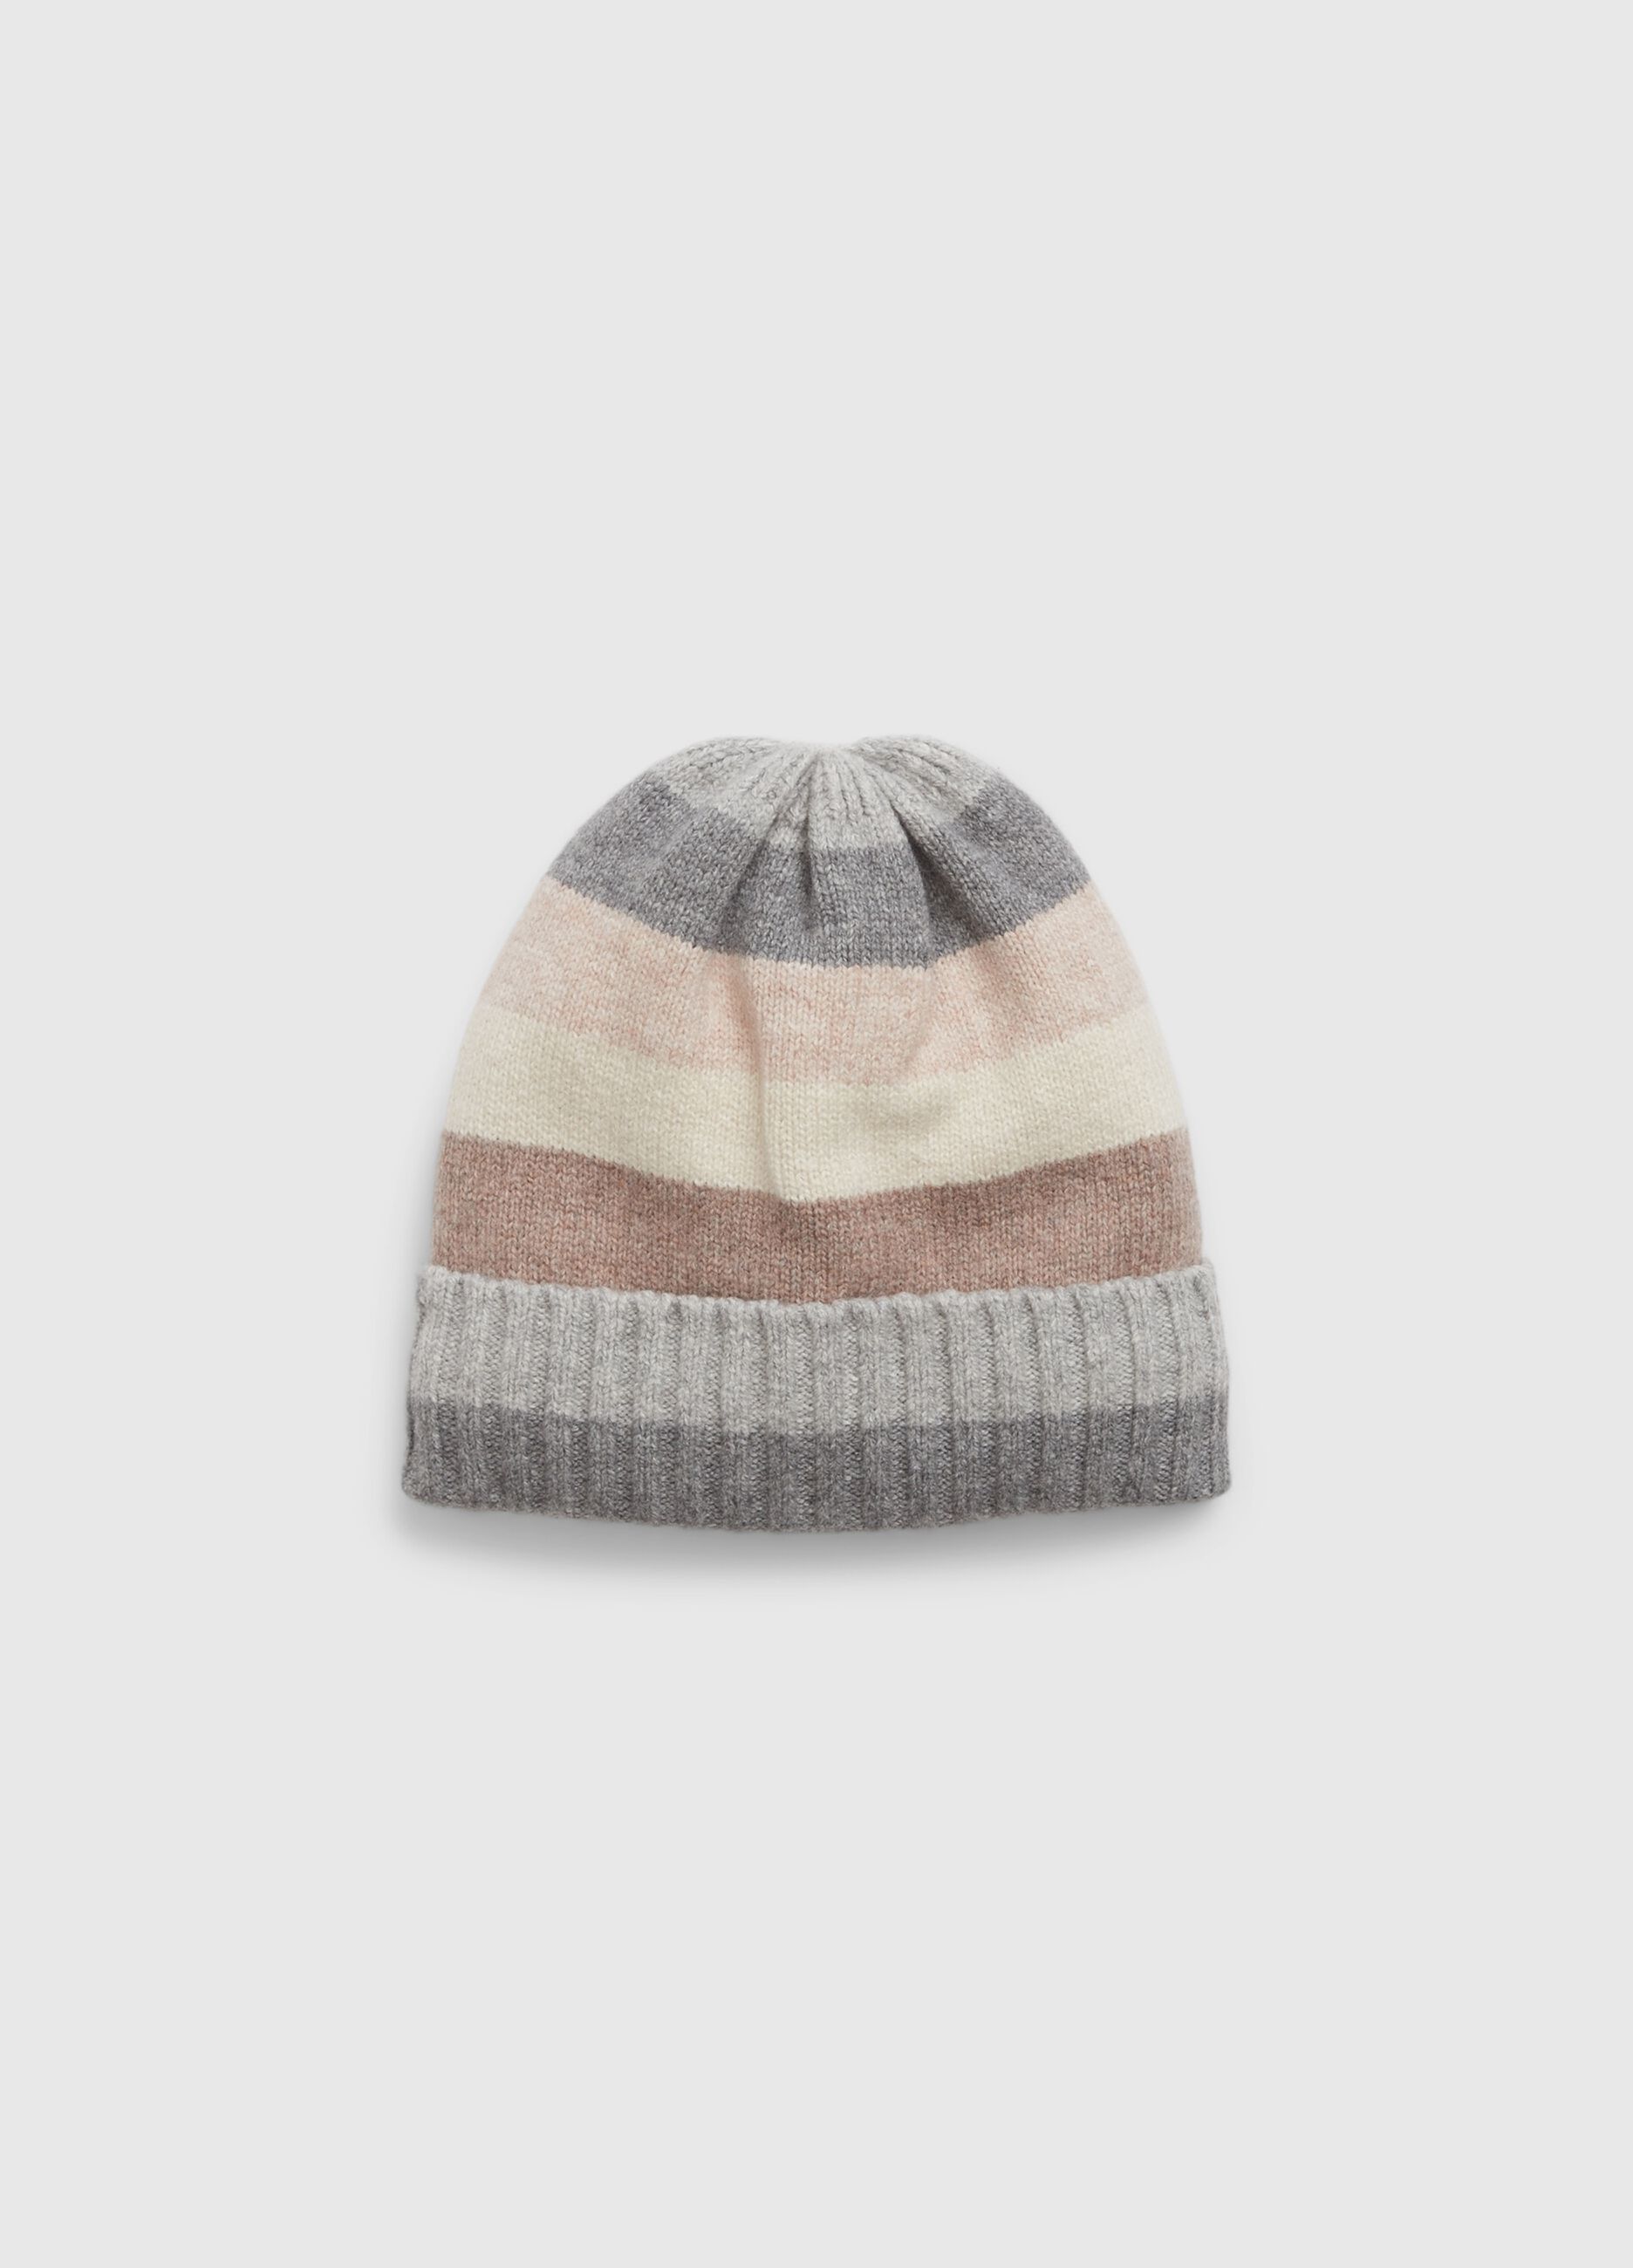 Striped beanie hat with fold